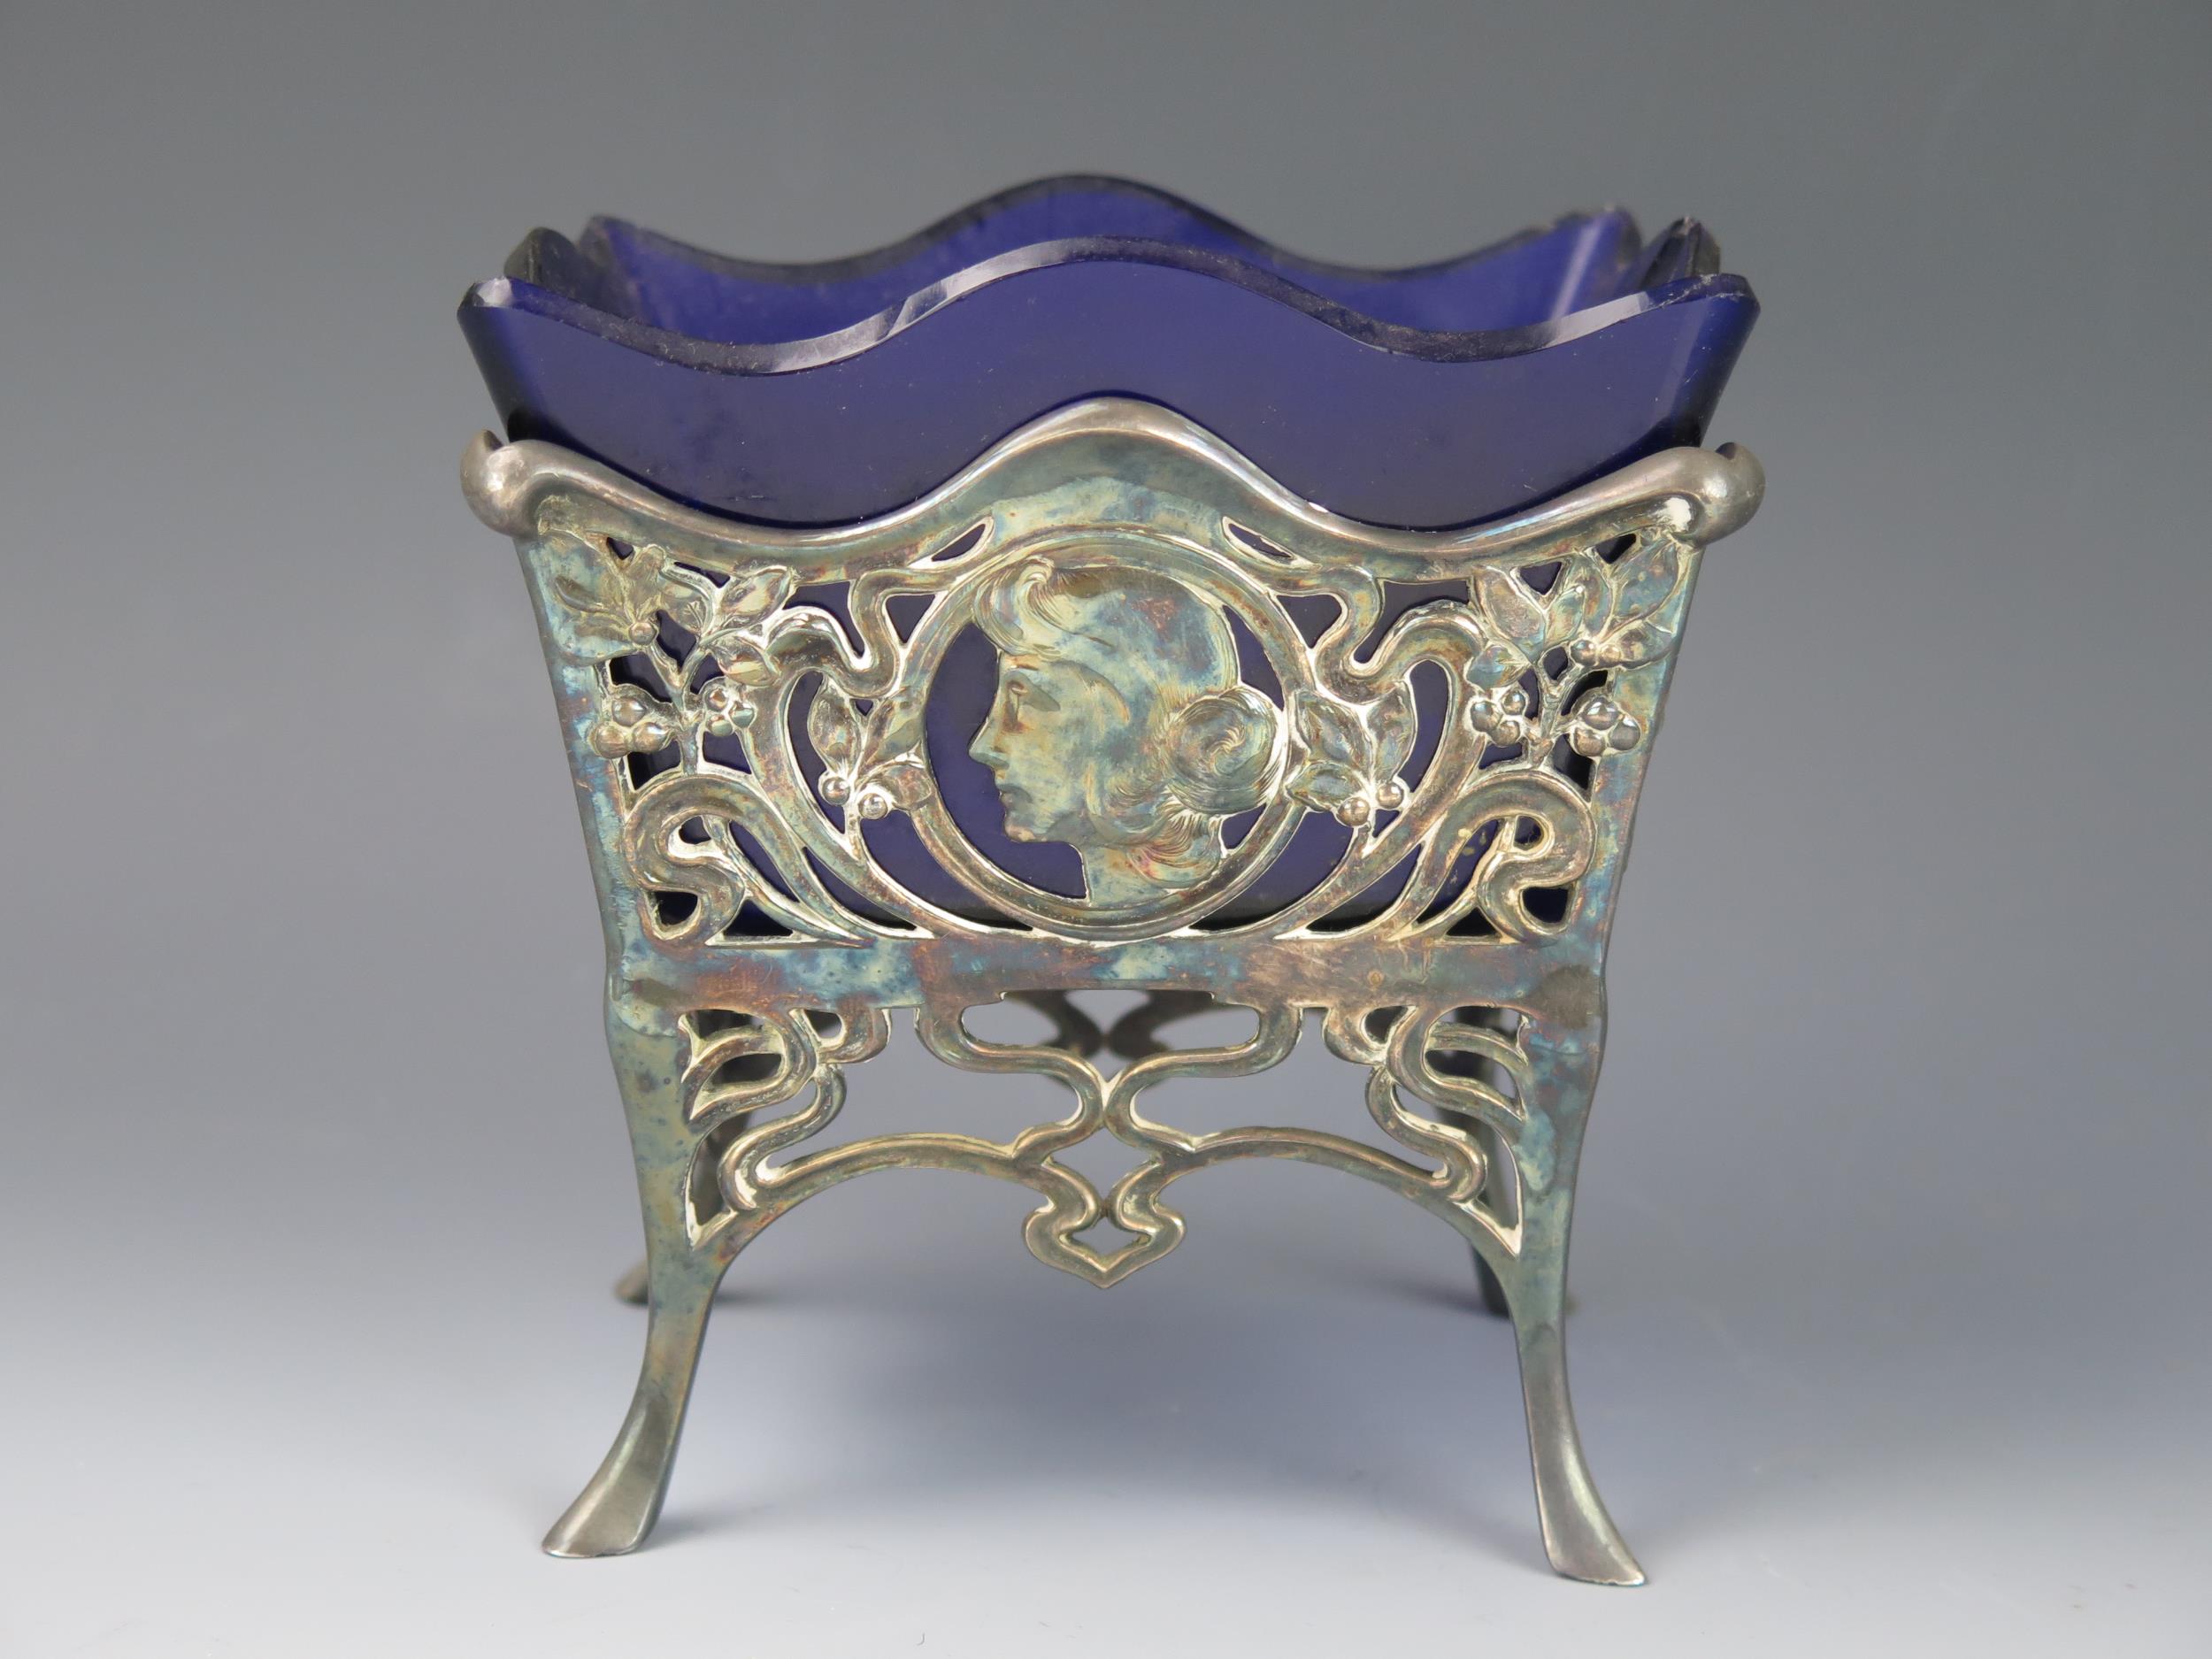 A WMF Art Nouveau period plated basket, of rectangular outline, with female masque and sinuous